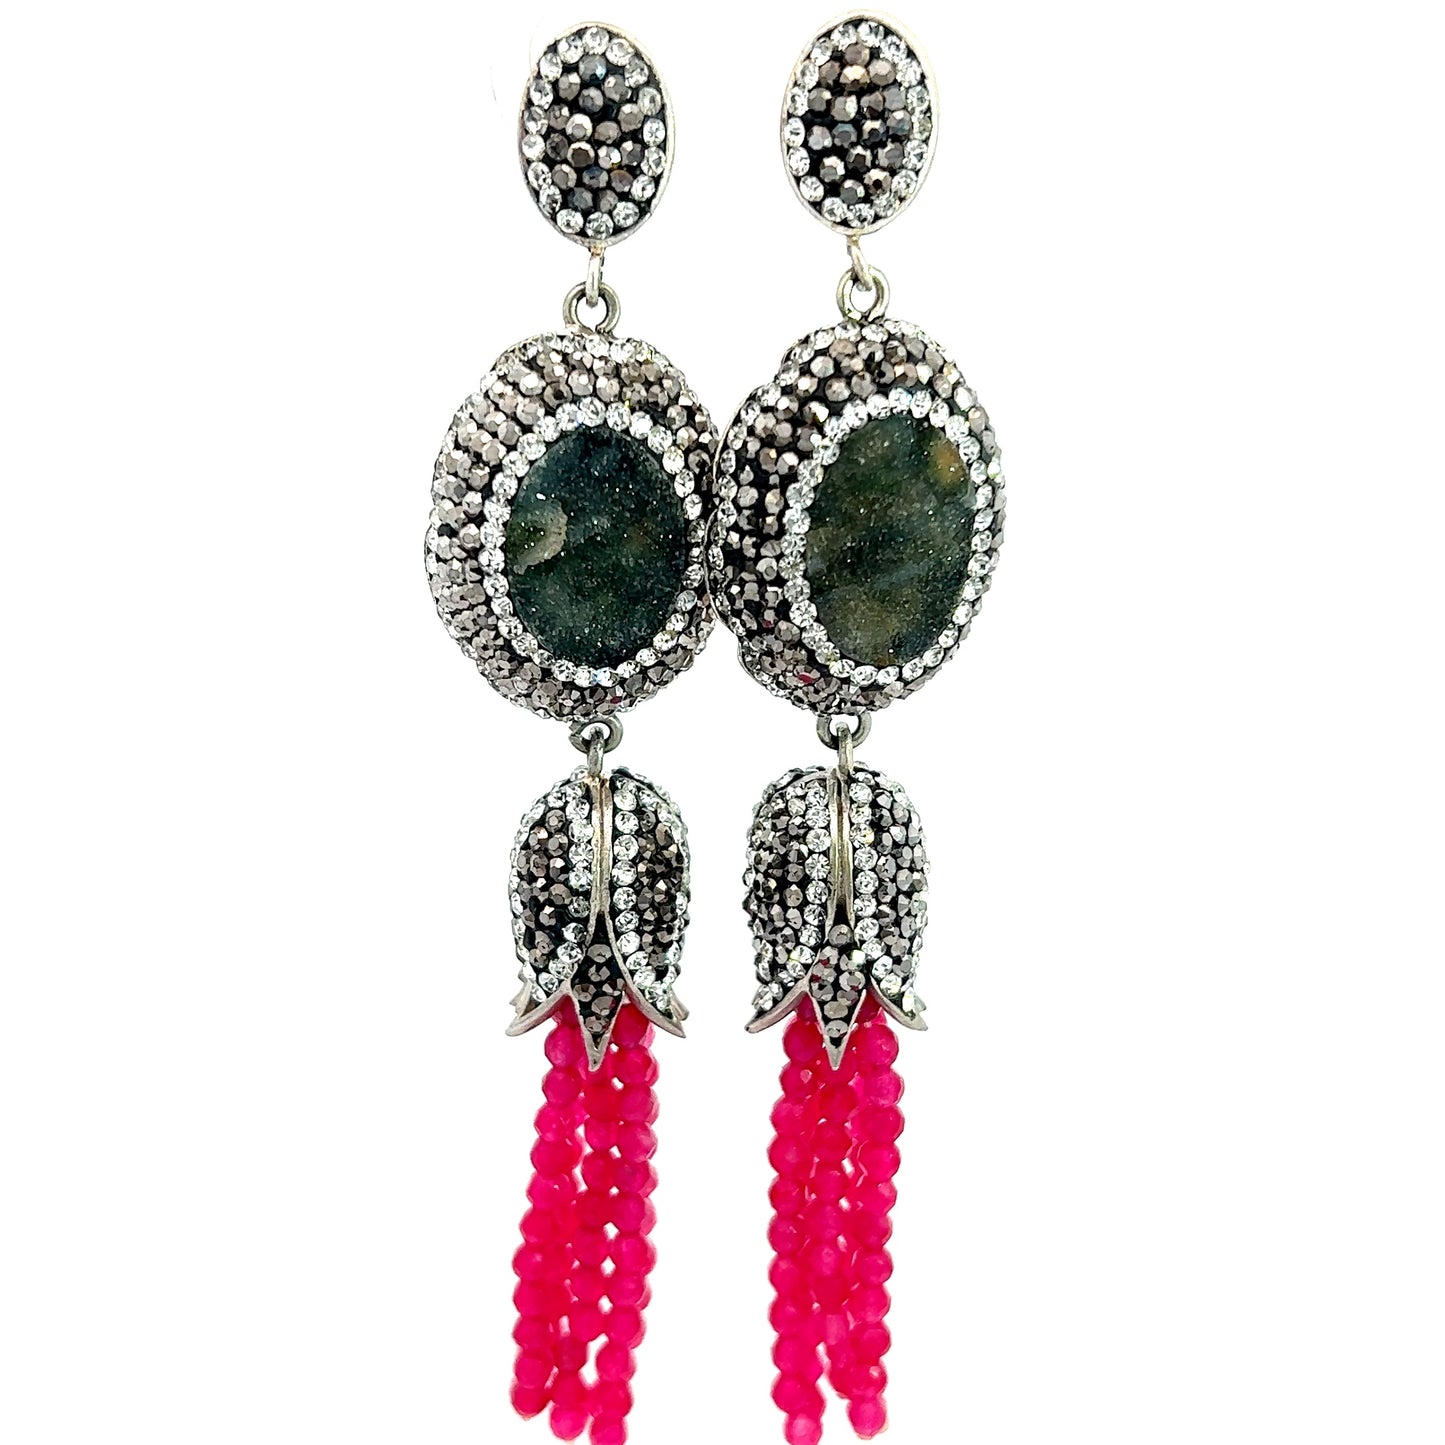 Pink Long Tassel Beaded Crystal Earring - Born To Glam